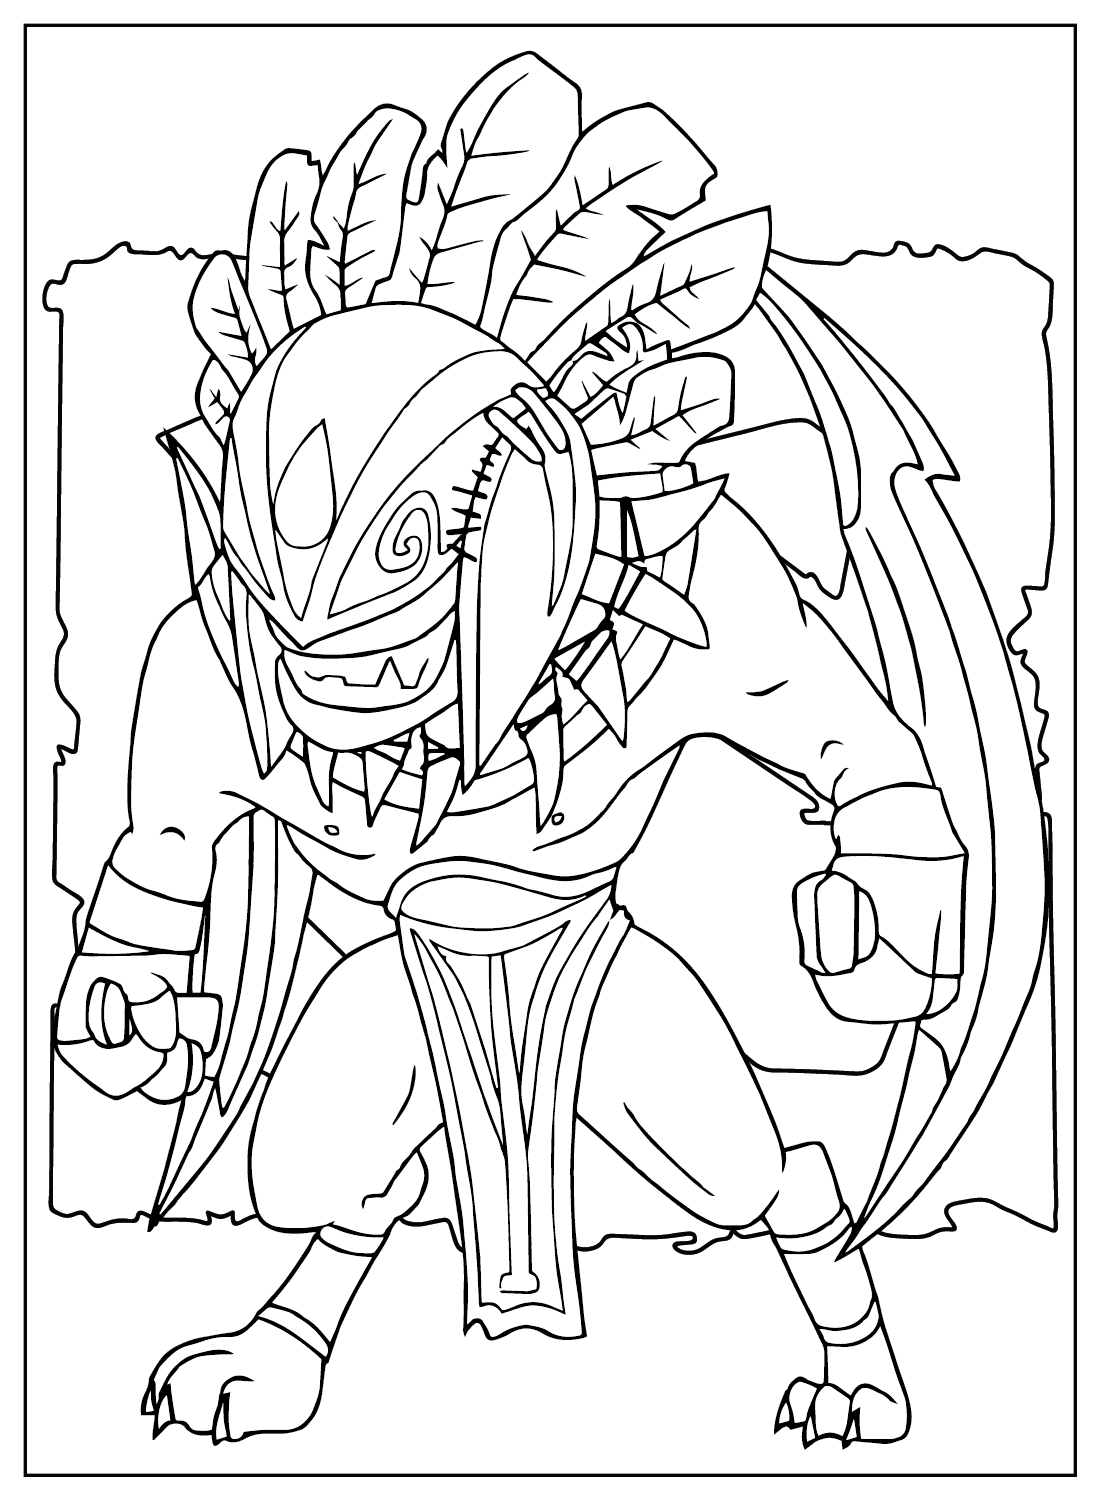 Bloodseeker Coloring Page from Dota 2